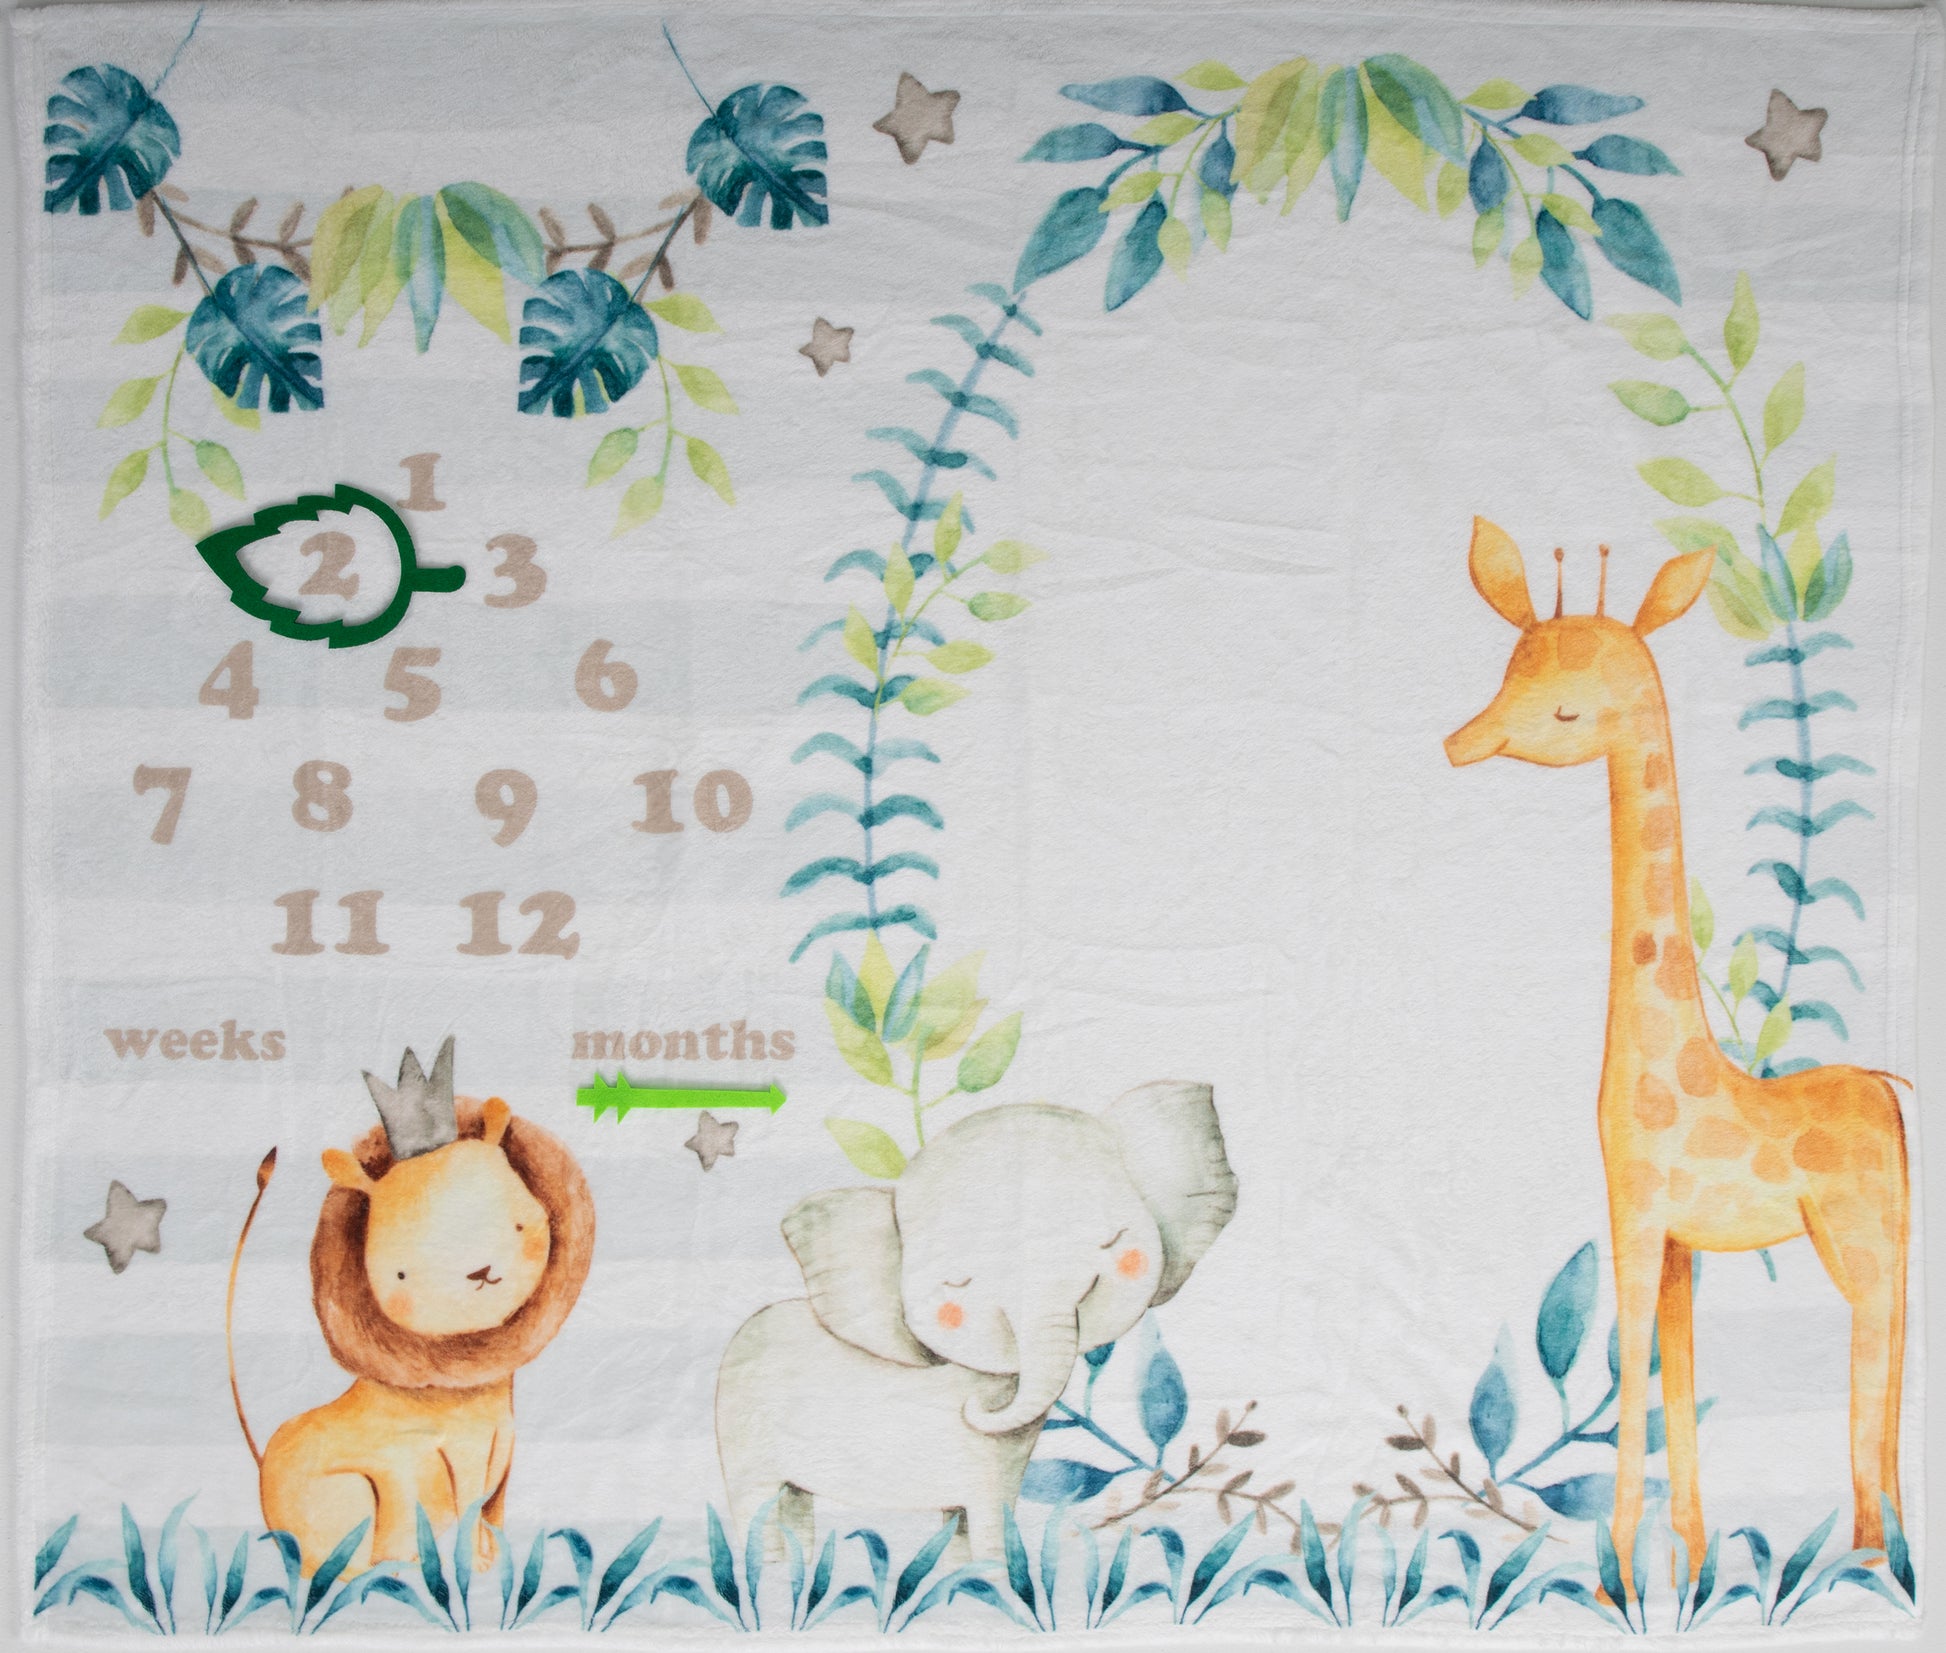 Capture your baby's growth and development with our soft and cozy wildlife wonders safari animals milestone blanket. It's perfect for monthly photos to track your little one's growth and create cherished keepsakes. Crafted from high-quality, soft fabric, our Milestone Blanket provides a comfortable and durable backdrop for your baby's milestone photoshoots. It's designed to withstand the countless moments of wonder and exploration it will witness.